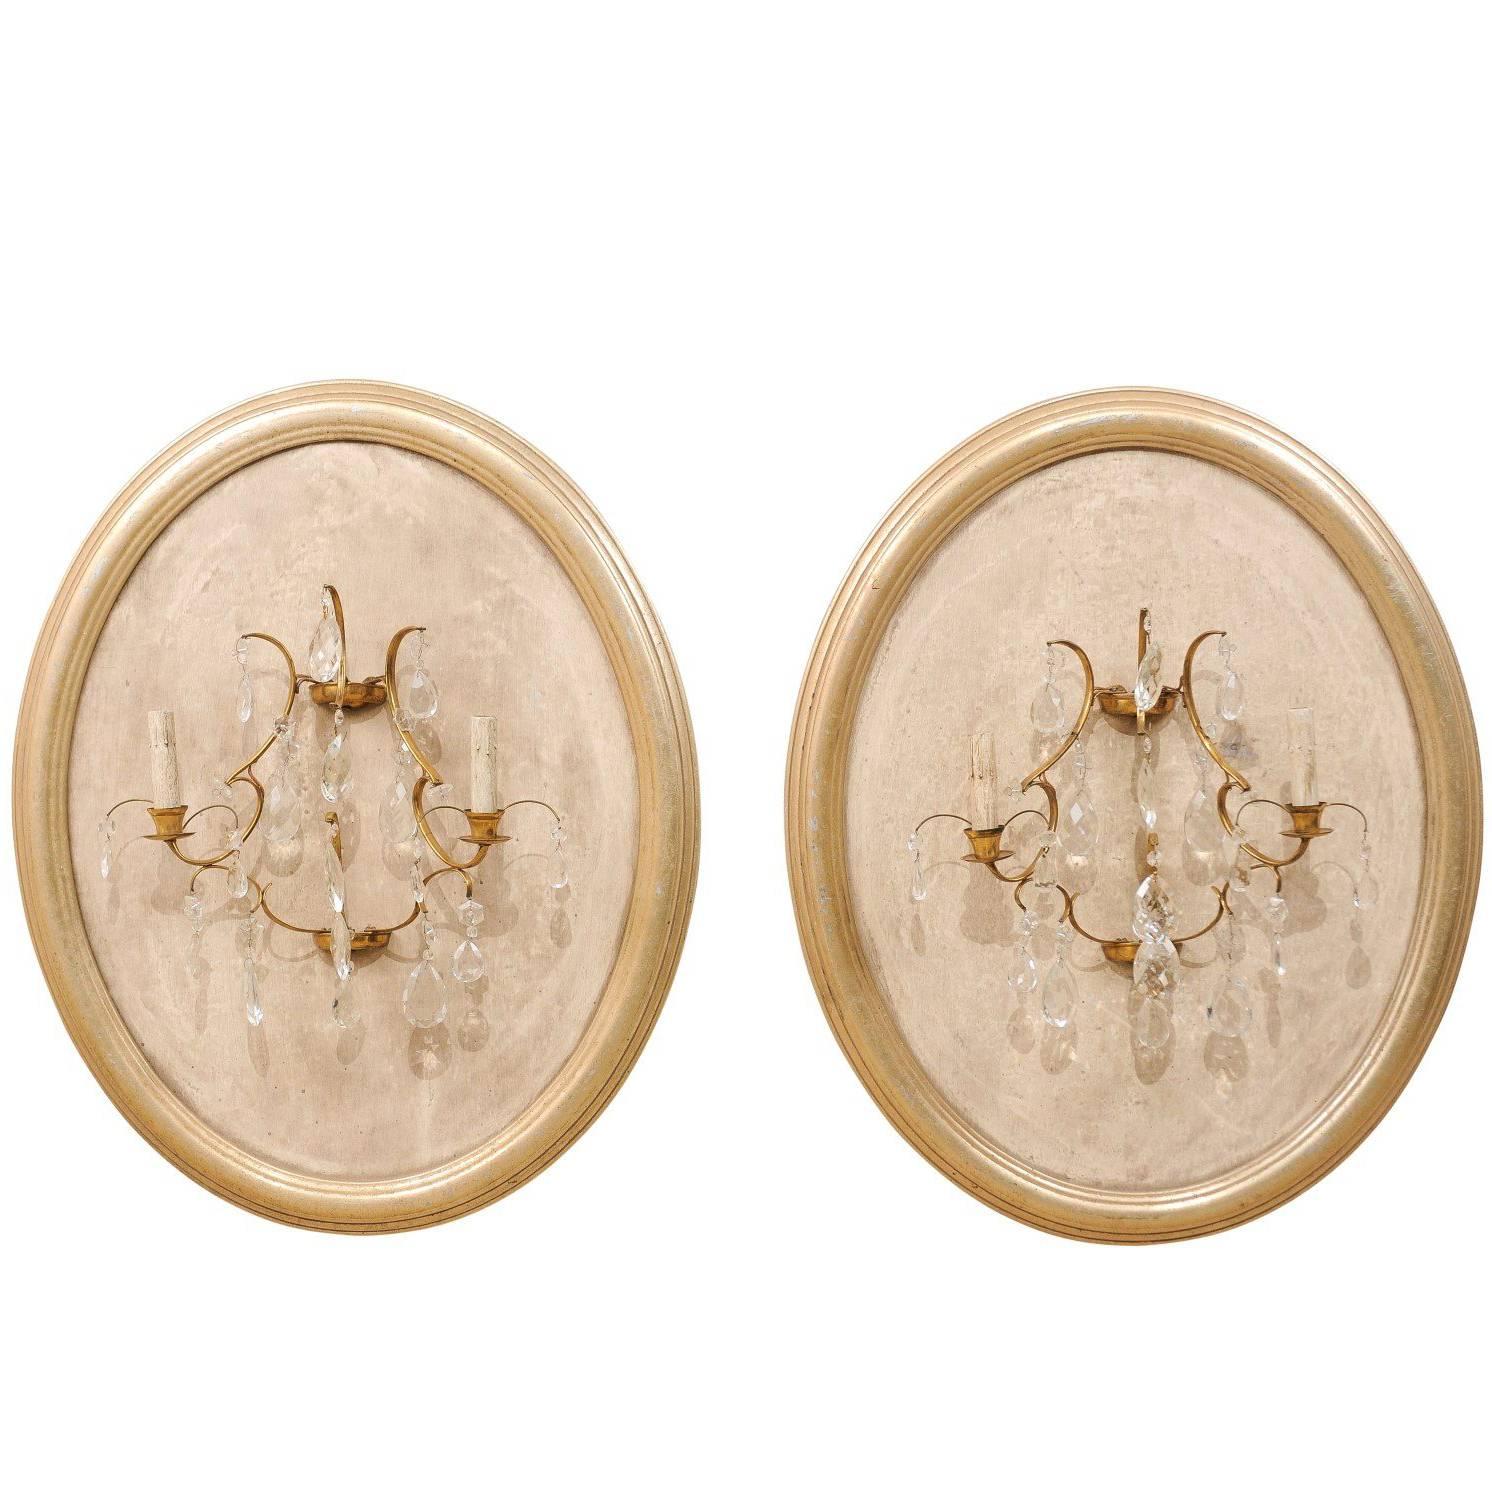 Pair of Neutral Cream Colored Crystal Sconces on Oval Wood Plaques, Two-Light